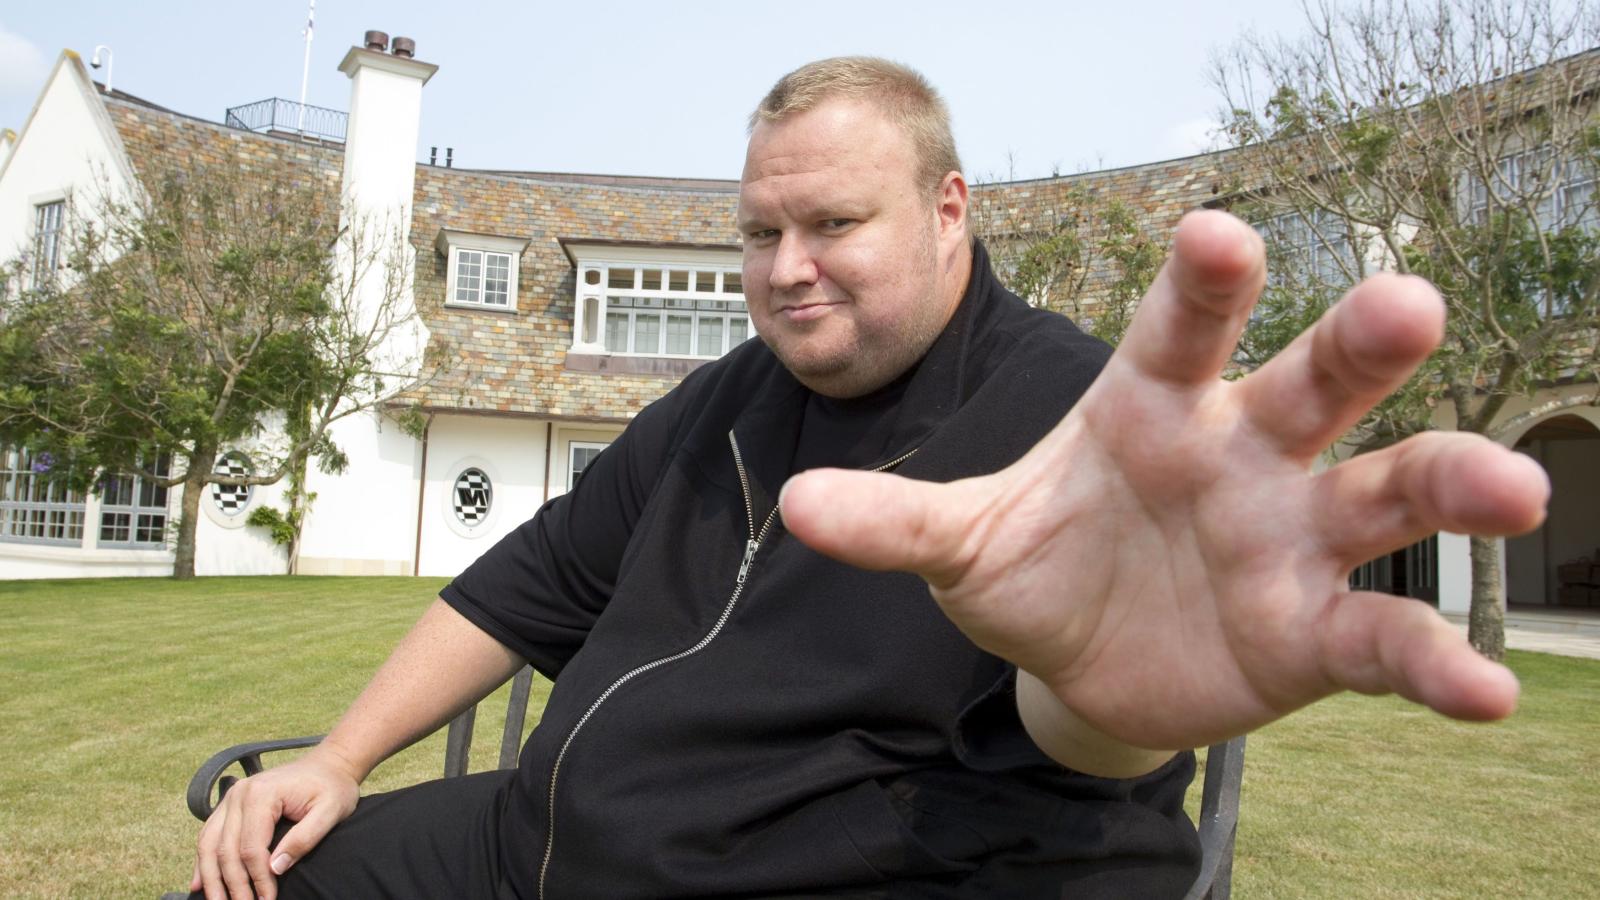 Kim Dotcom Discusses the Swelling Crypto Economy and His Plans to